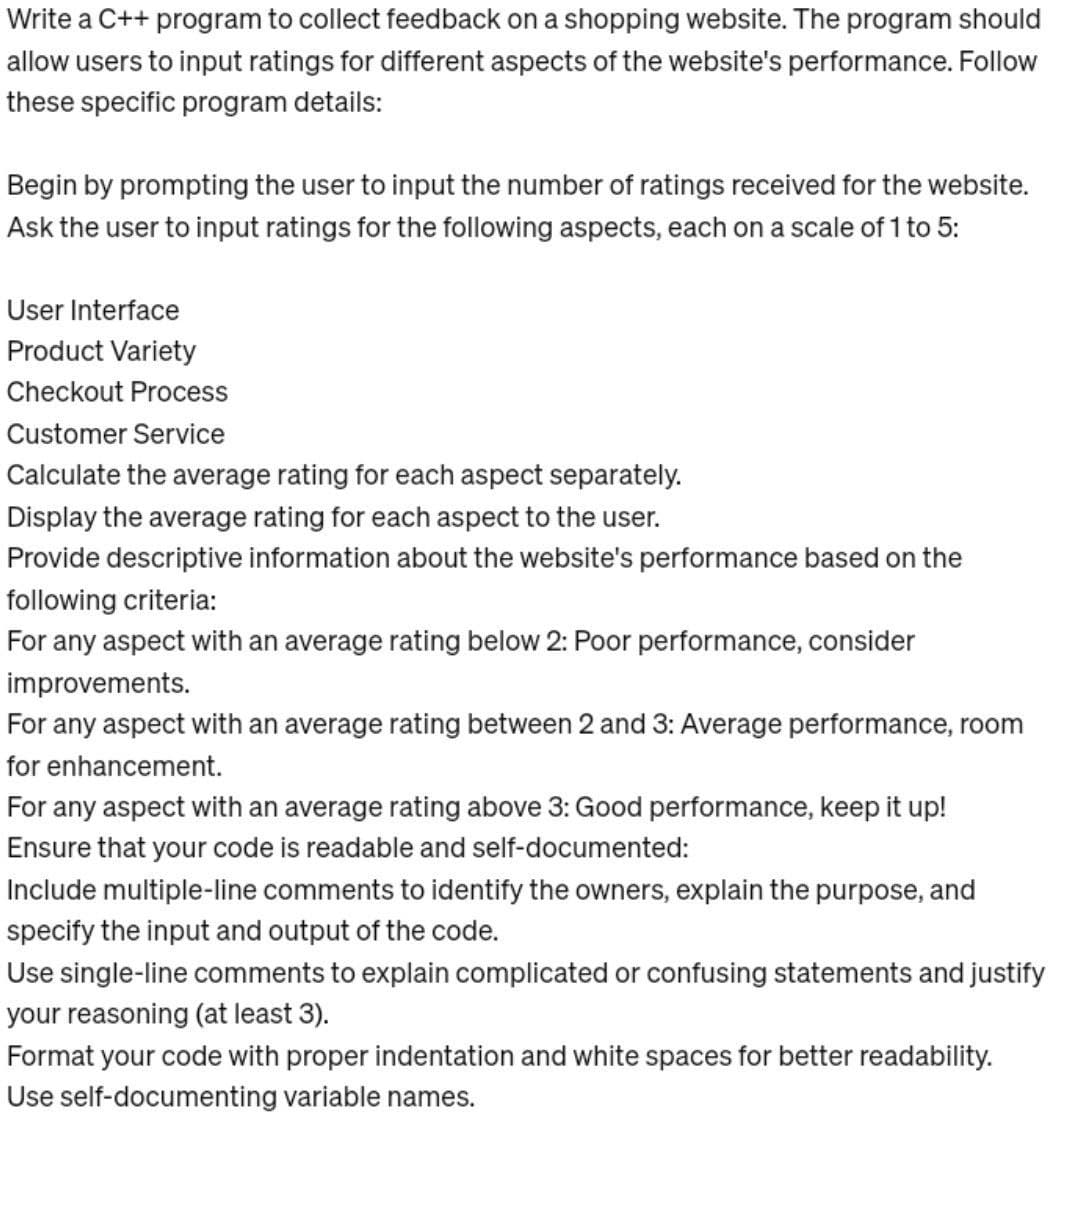 Write a C++ program to collect feedback on a shopping website. The program should
allow users to input ratings for different aspects of the website's performance. Follow
these specific program details:
Begin by prompting the user to input the number of ratings received for the website.
Ask the user to input ratings for the following aspects, each on a scale of 1 to 5:
User Interface
Product Variety
Checkout Process
Customer Service
Calculate the average rating for each aspect separately.
Display the average rating for each aspect to the user.
Provide descriptive information about the website's performance based on the
following criteria:
For any aspect with an average rating below 2: Poor performance, consider
improvements.
For any aspect with an average rating between 2 and 3: Average performance, room
for enhancement.
For any aspect with an average rating above 3: Good performance, keep it up!
Ensure that your code is readable and self-documented:
Include multiple-line comments to identify the owners, explain the purpose, and
specify the input and output of the code.
Use single-line comments to explain complicated or confusing statements and justify
your reasoning (at least 3).
Format your code with proper indentation and white spaces for better readability.
Use self-documenting variable names.